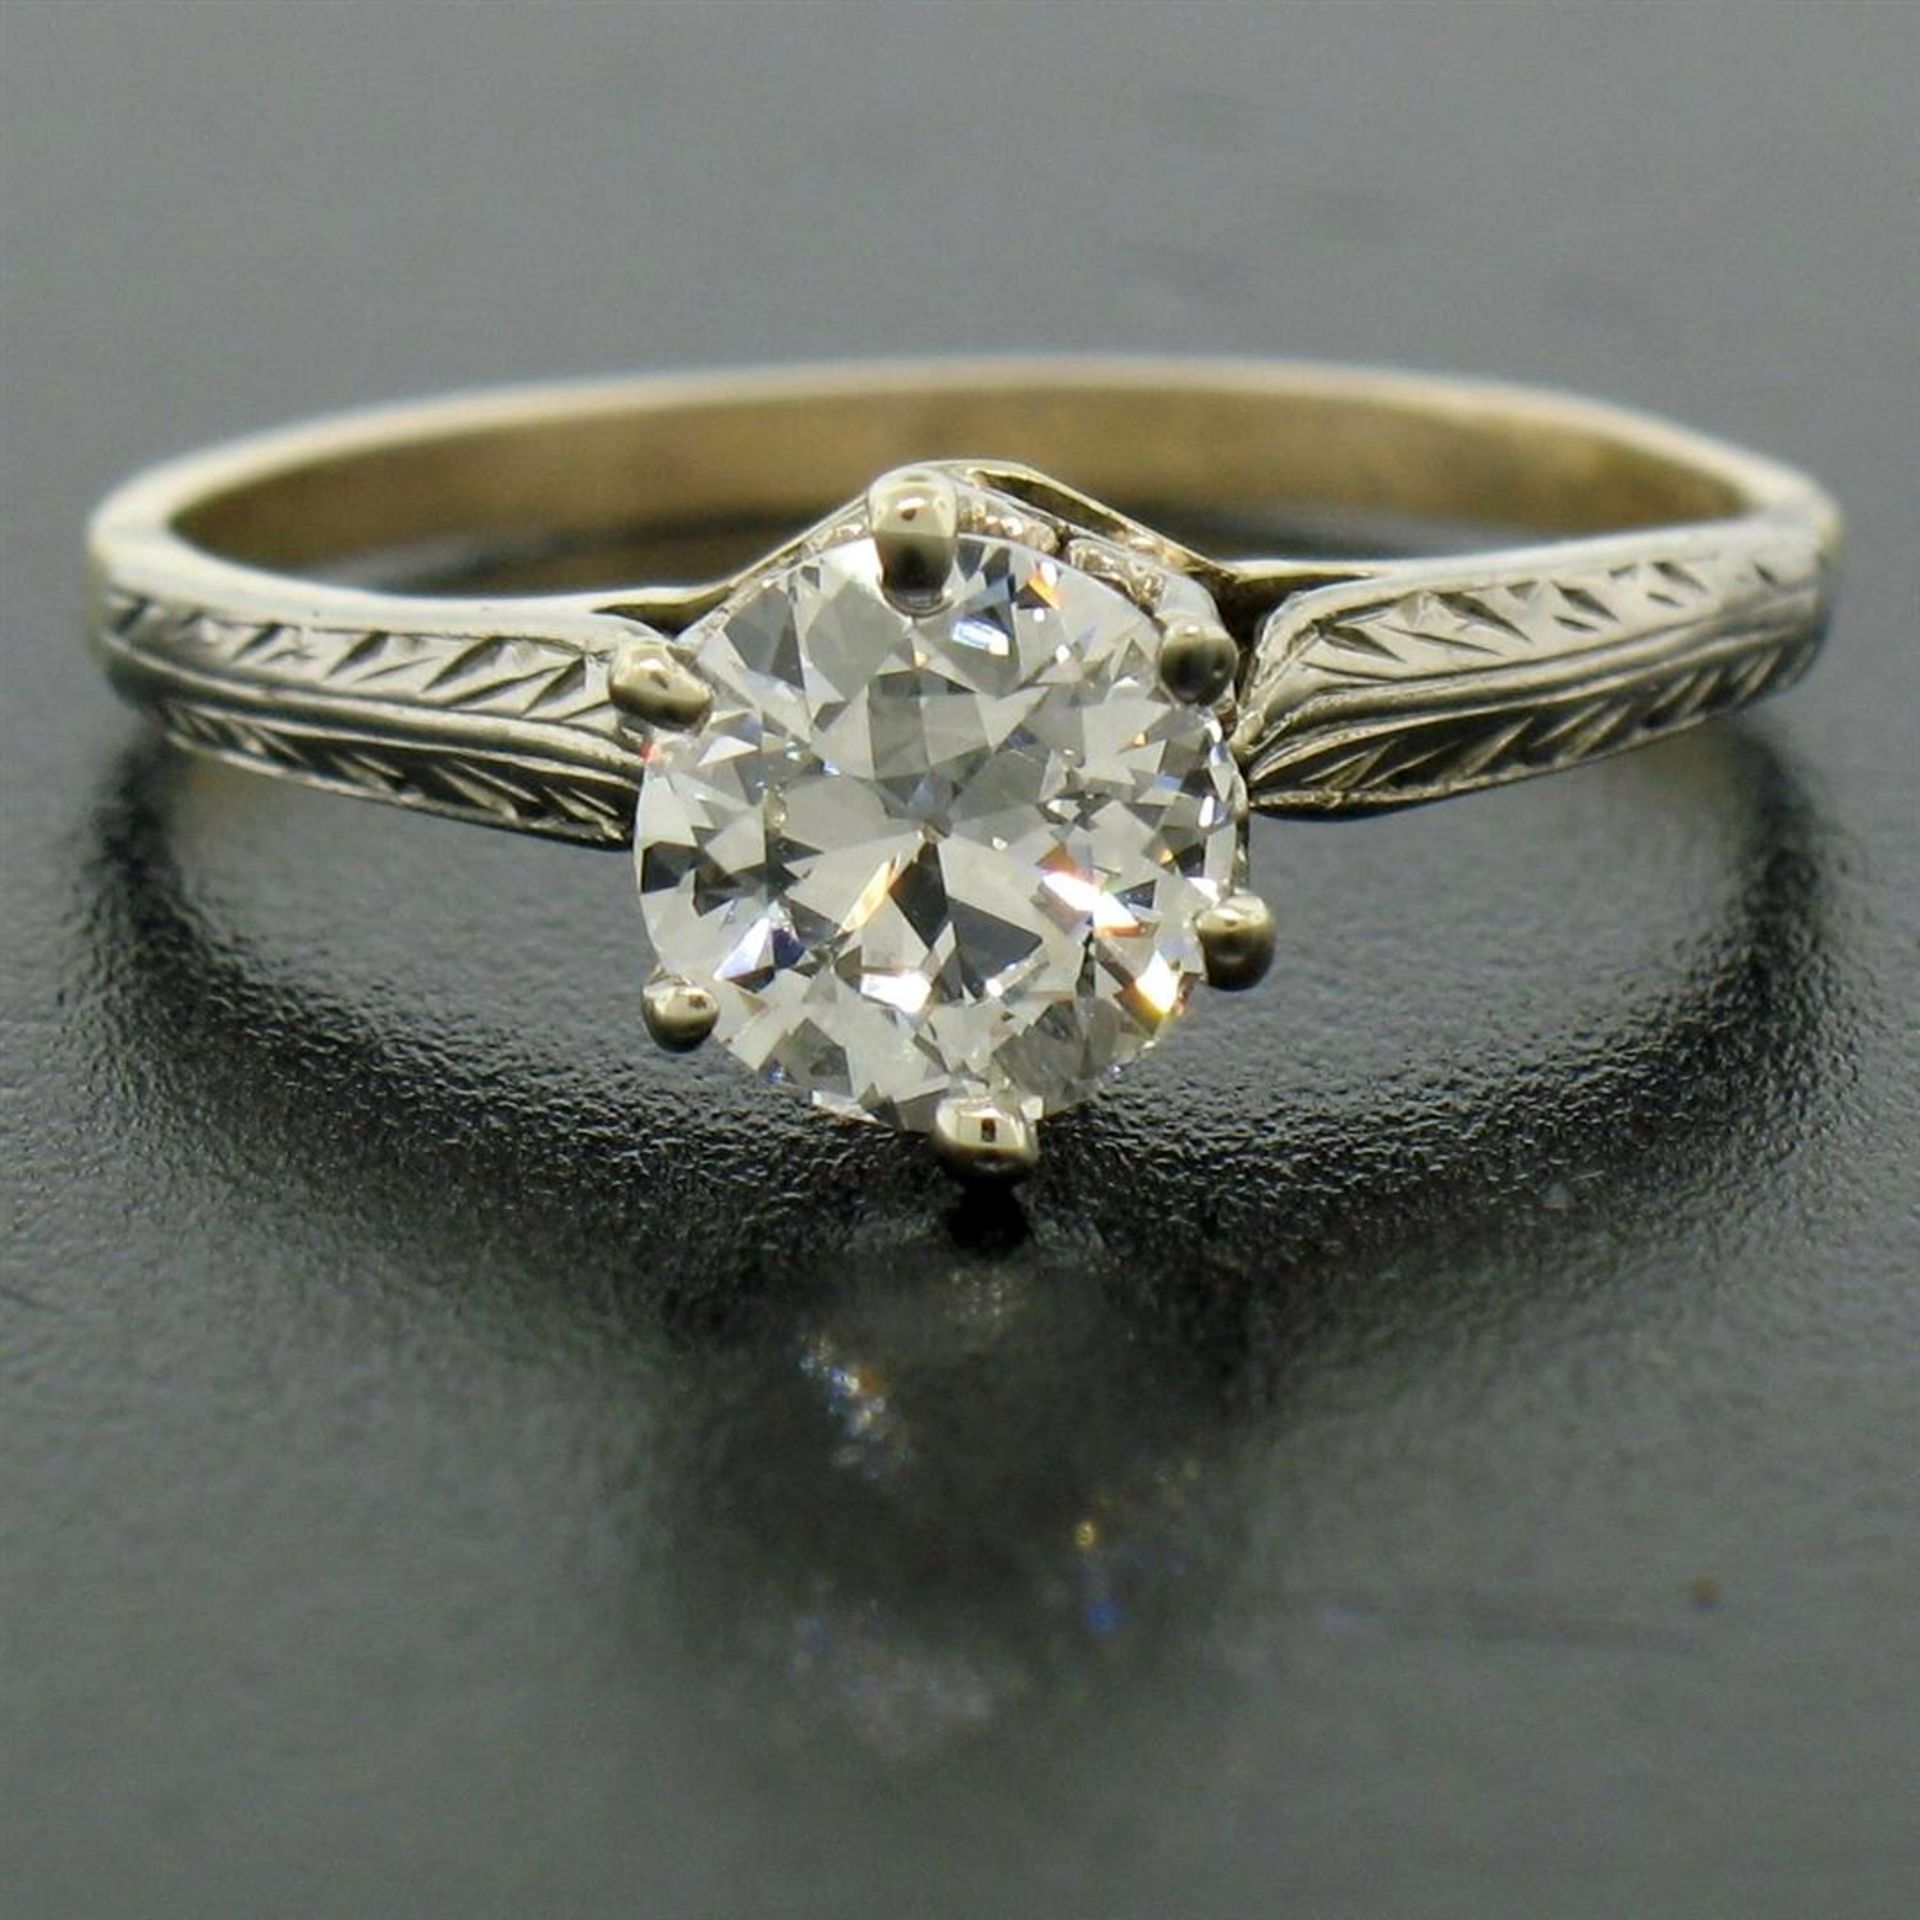 Etched 14k TT Gold .80 ct European Cut Diamond Solitaire Engagement Ring - Image 2 of 7